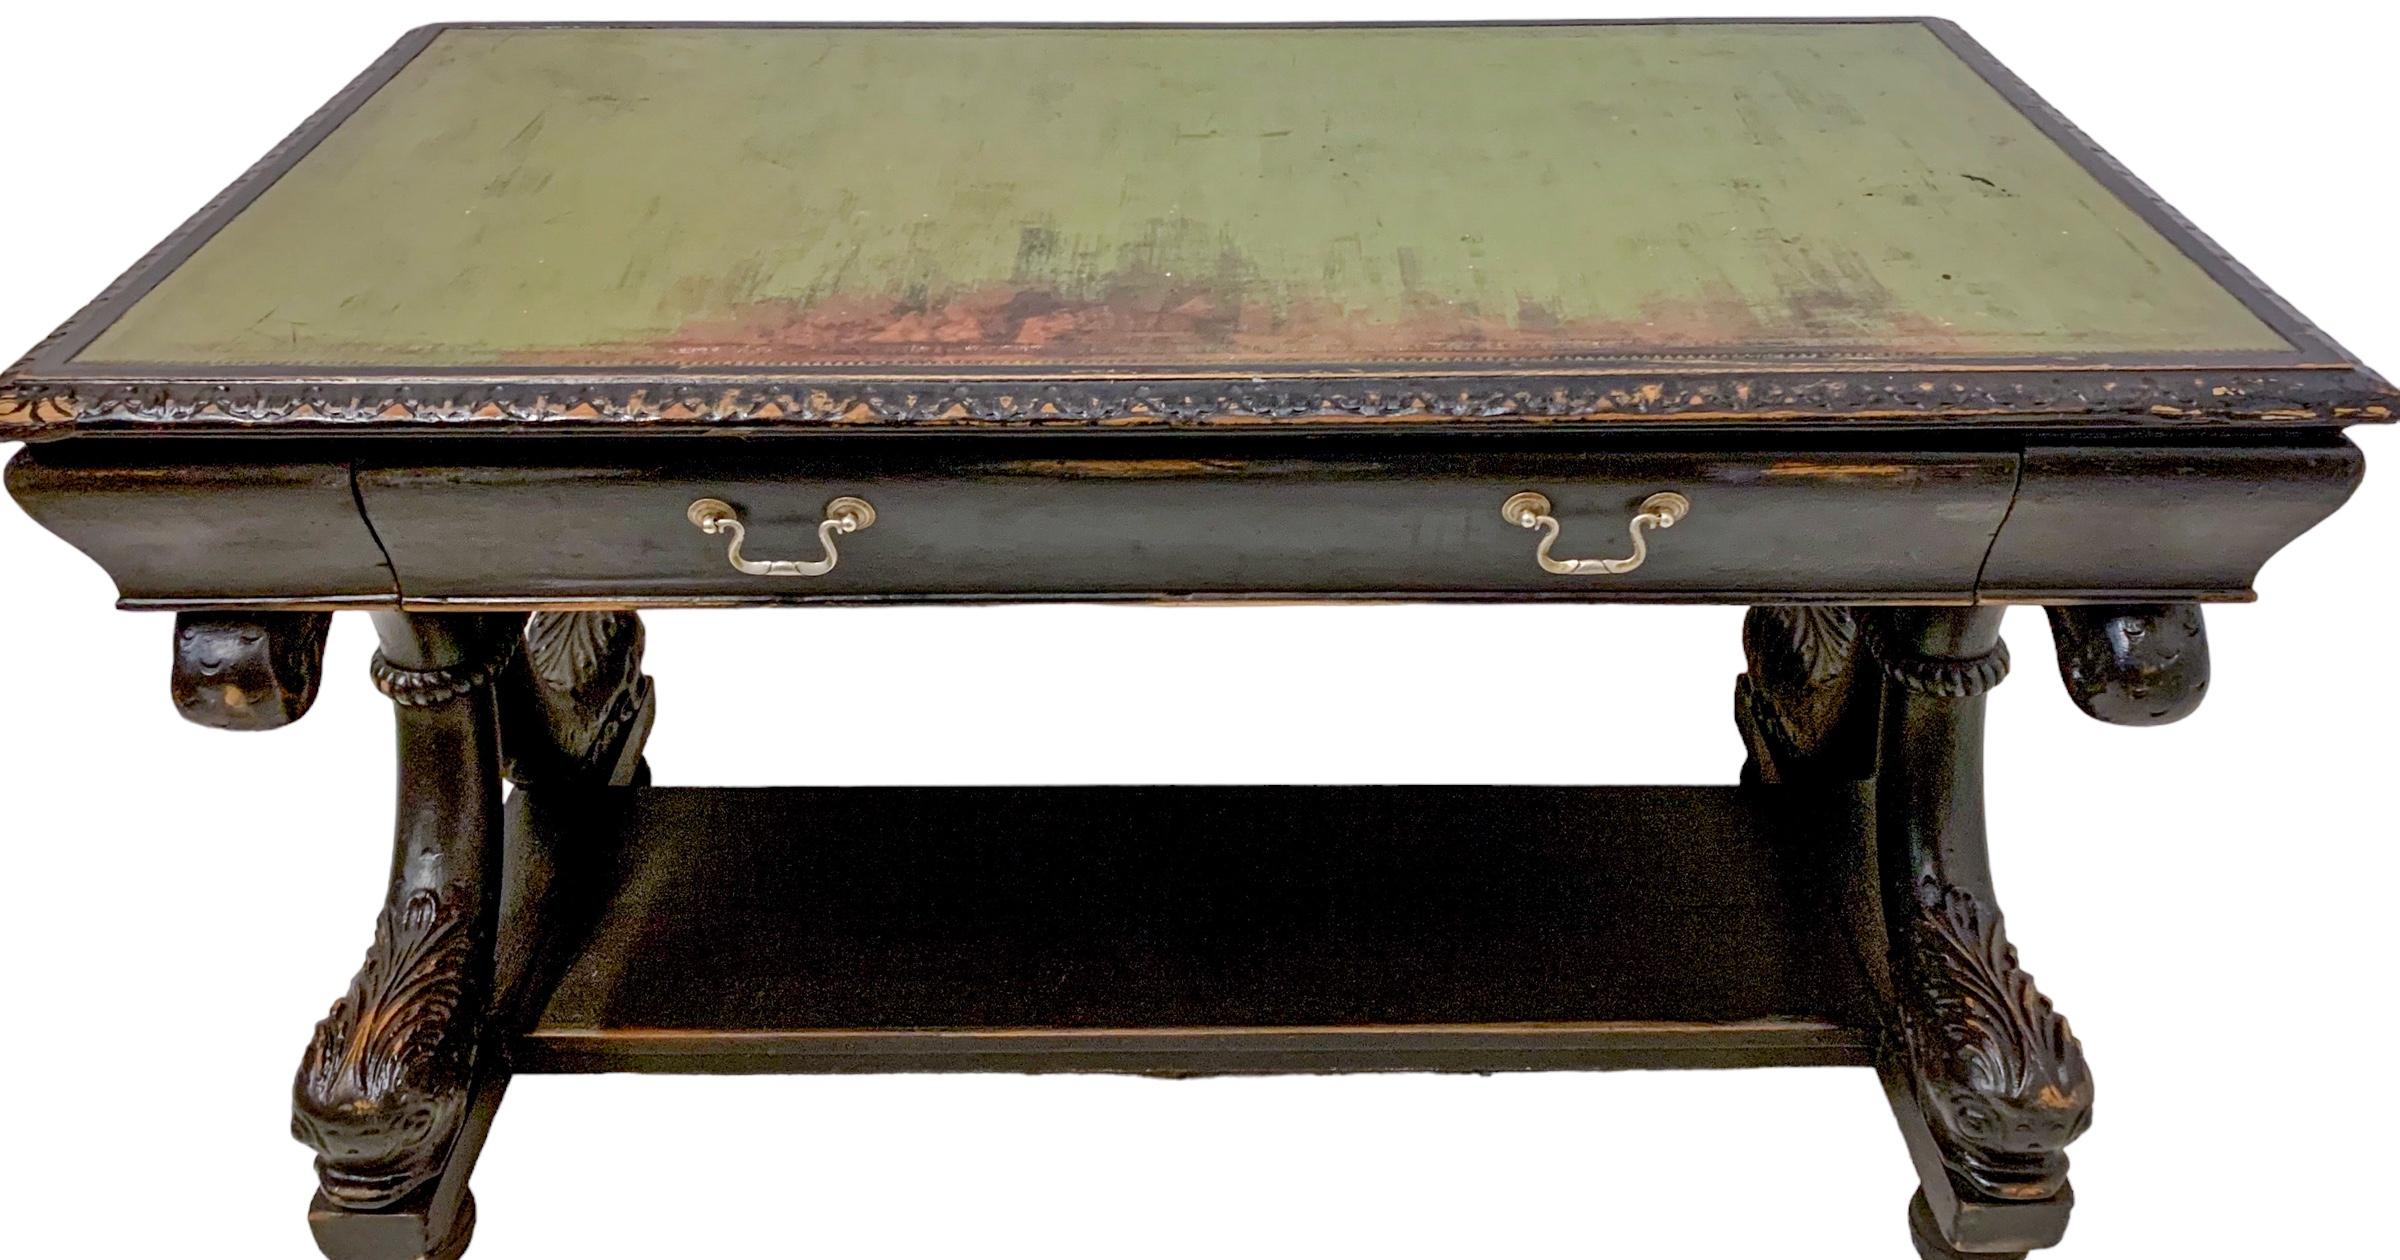 Neoclassical Neo-Classical R.J. Horner Style Desk / Table Green Leather Top & Dolphin Base For Sale